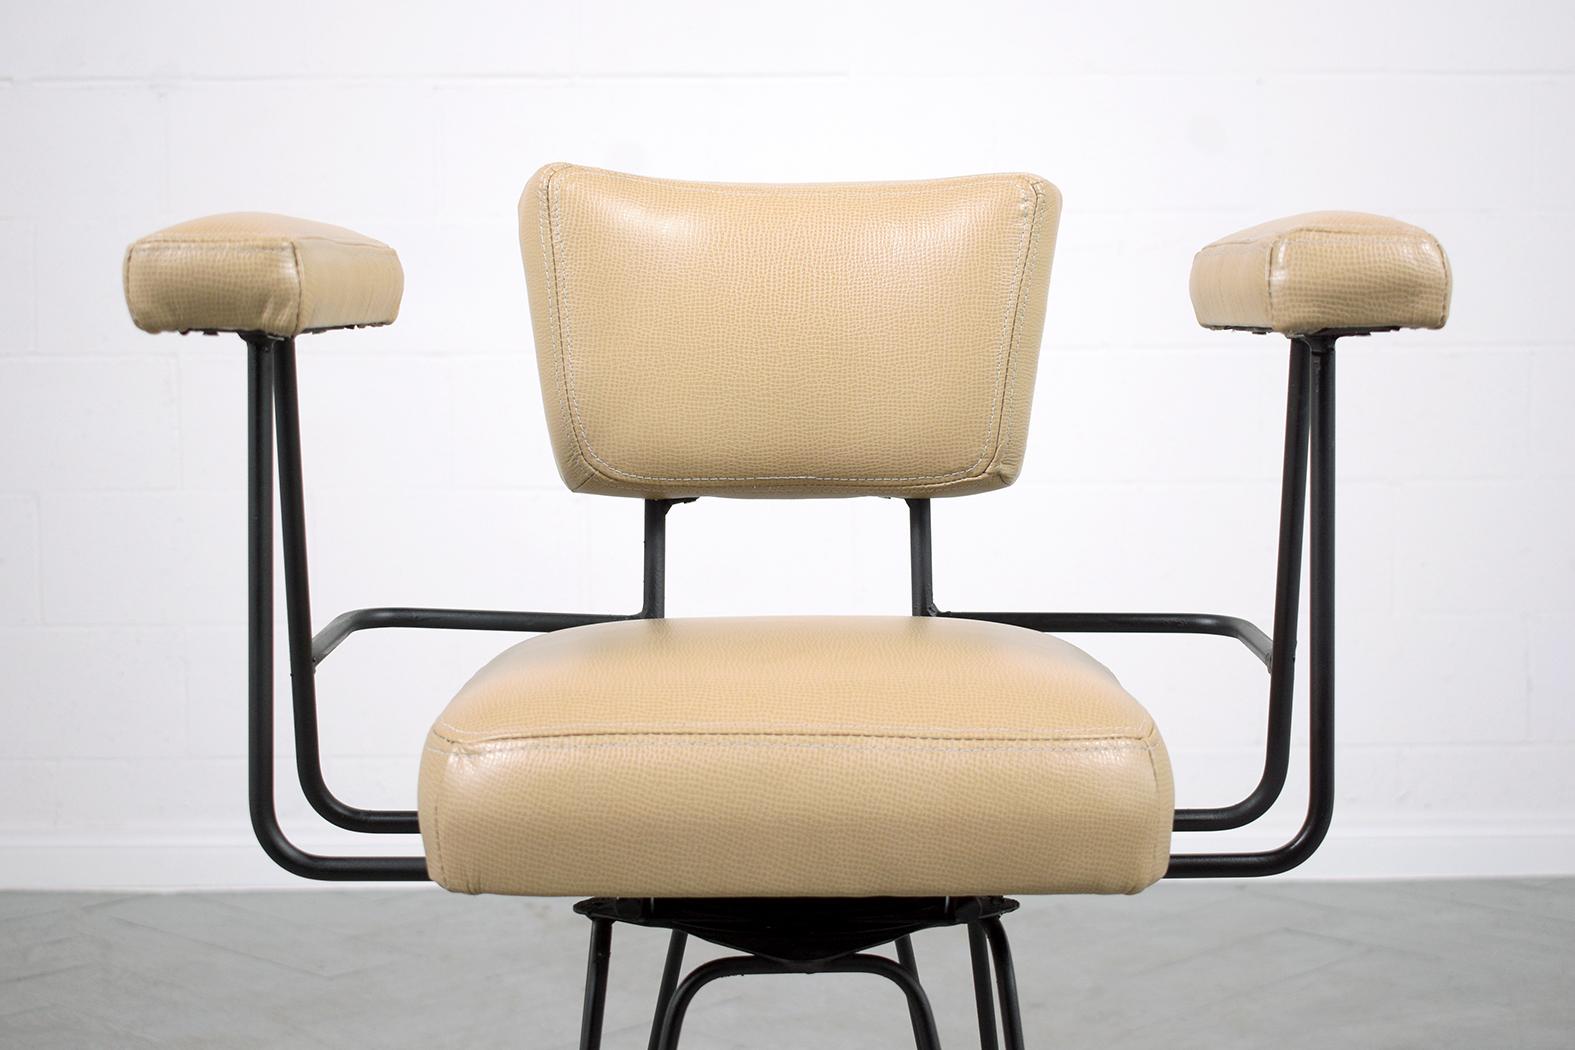 American Restored 1970s Mid-Century Modern Swivel Barstools in Beige Leather For Sale